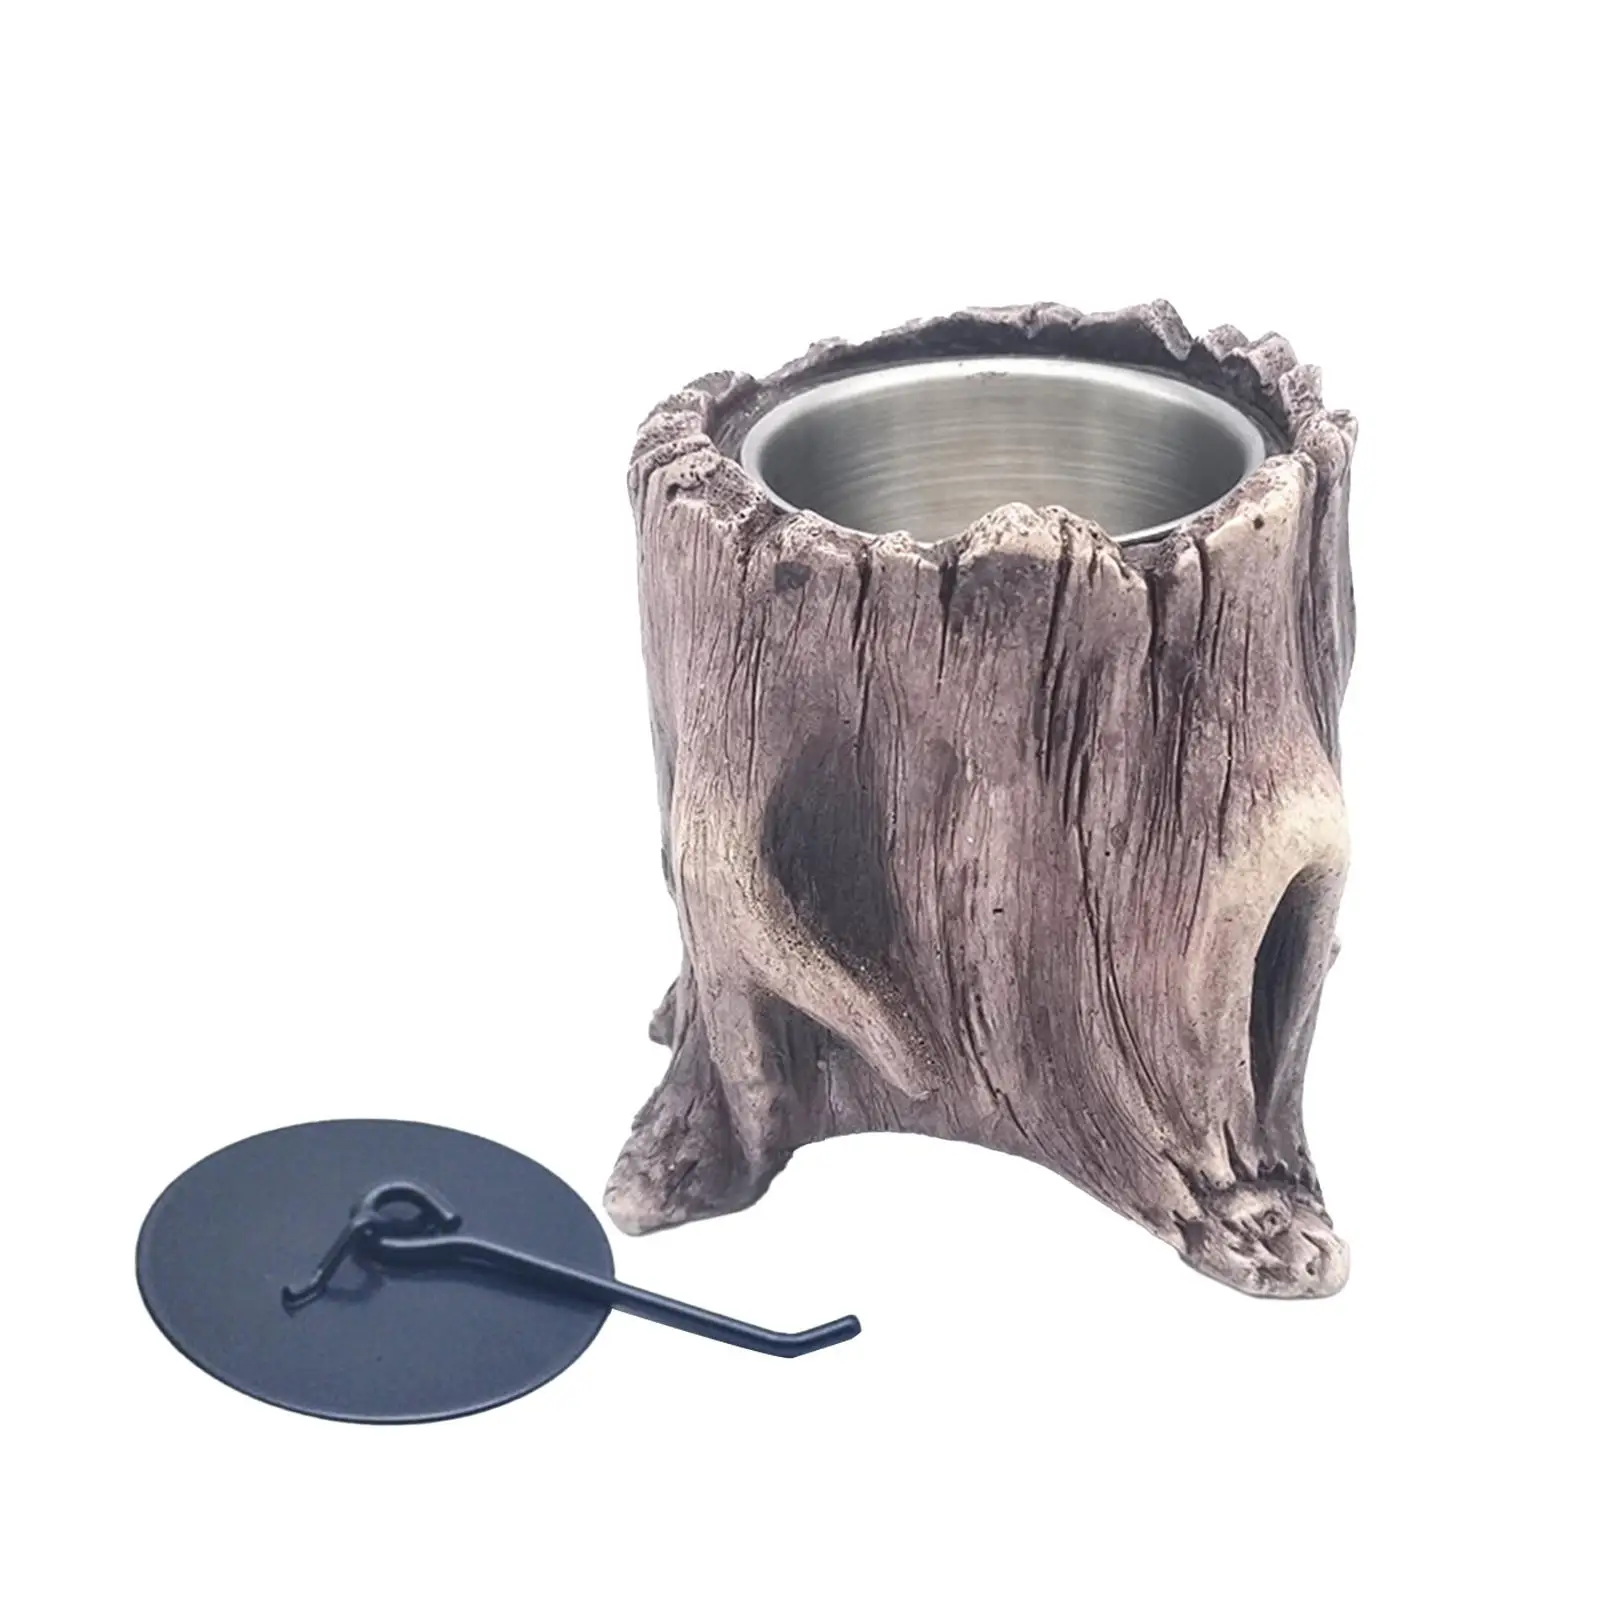 Indoor Fire Pit Fire Bowls Tree Stump Teapot Base Conch Fire Concrete Bowl Pot Alcohol Fireplace for Gardens Dining Room Decor